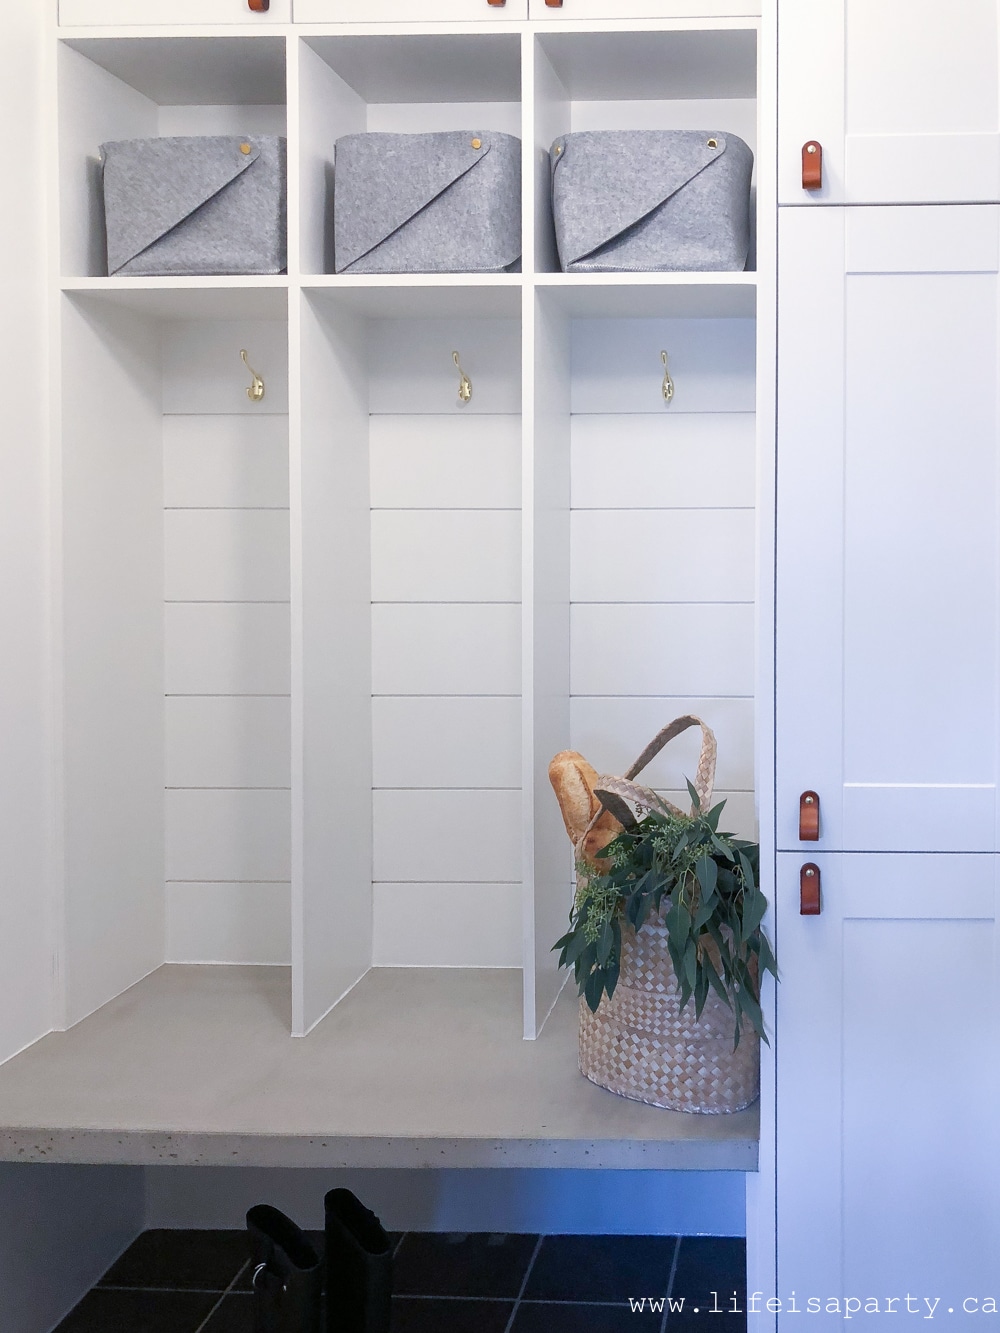 DIY Mudroom Lockers: use standard off the shelf hardware store cabinets and MDF to create custom mudroom lockers and storage solutions.